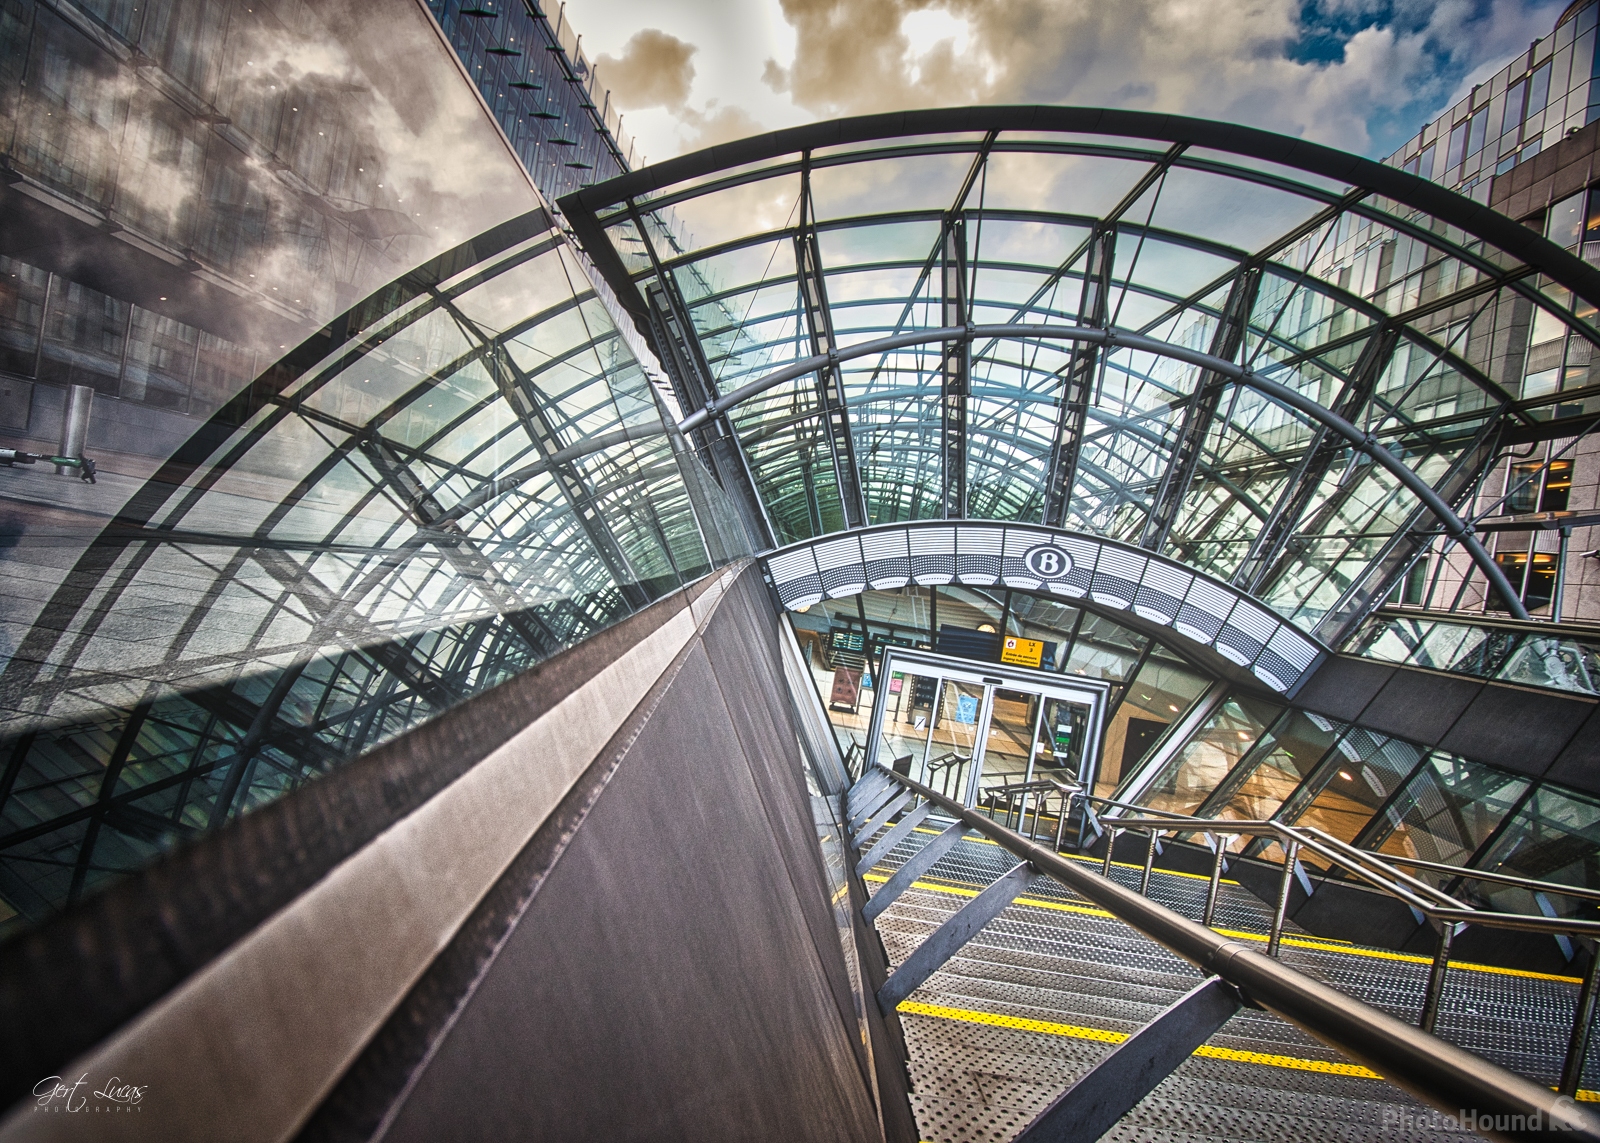 Image of Luxembourg Train Station by Gert Lucas